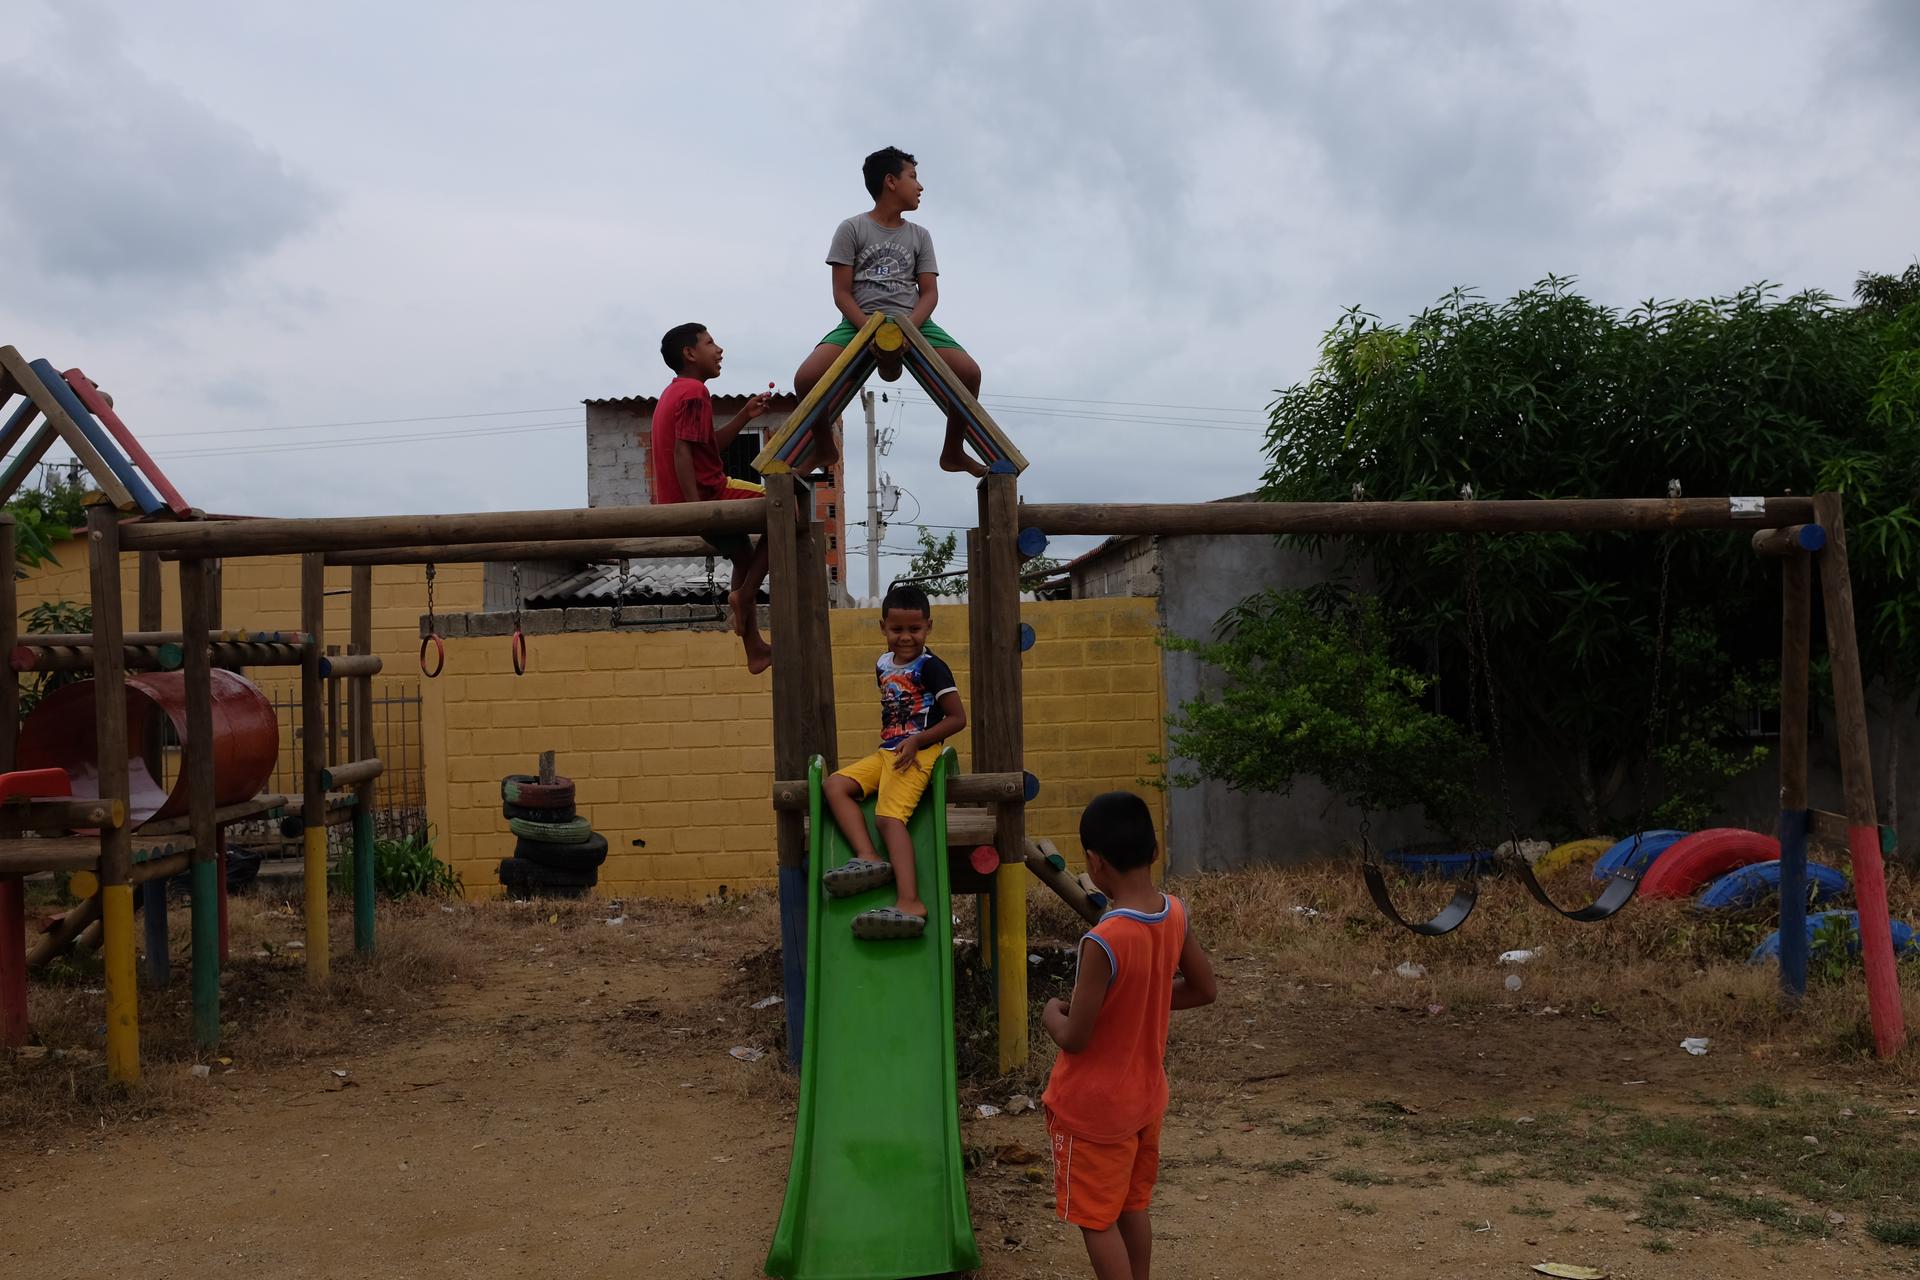 Children play on a playground in the City of Women.